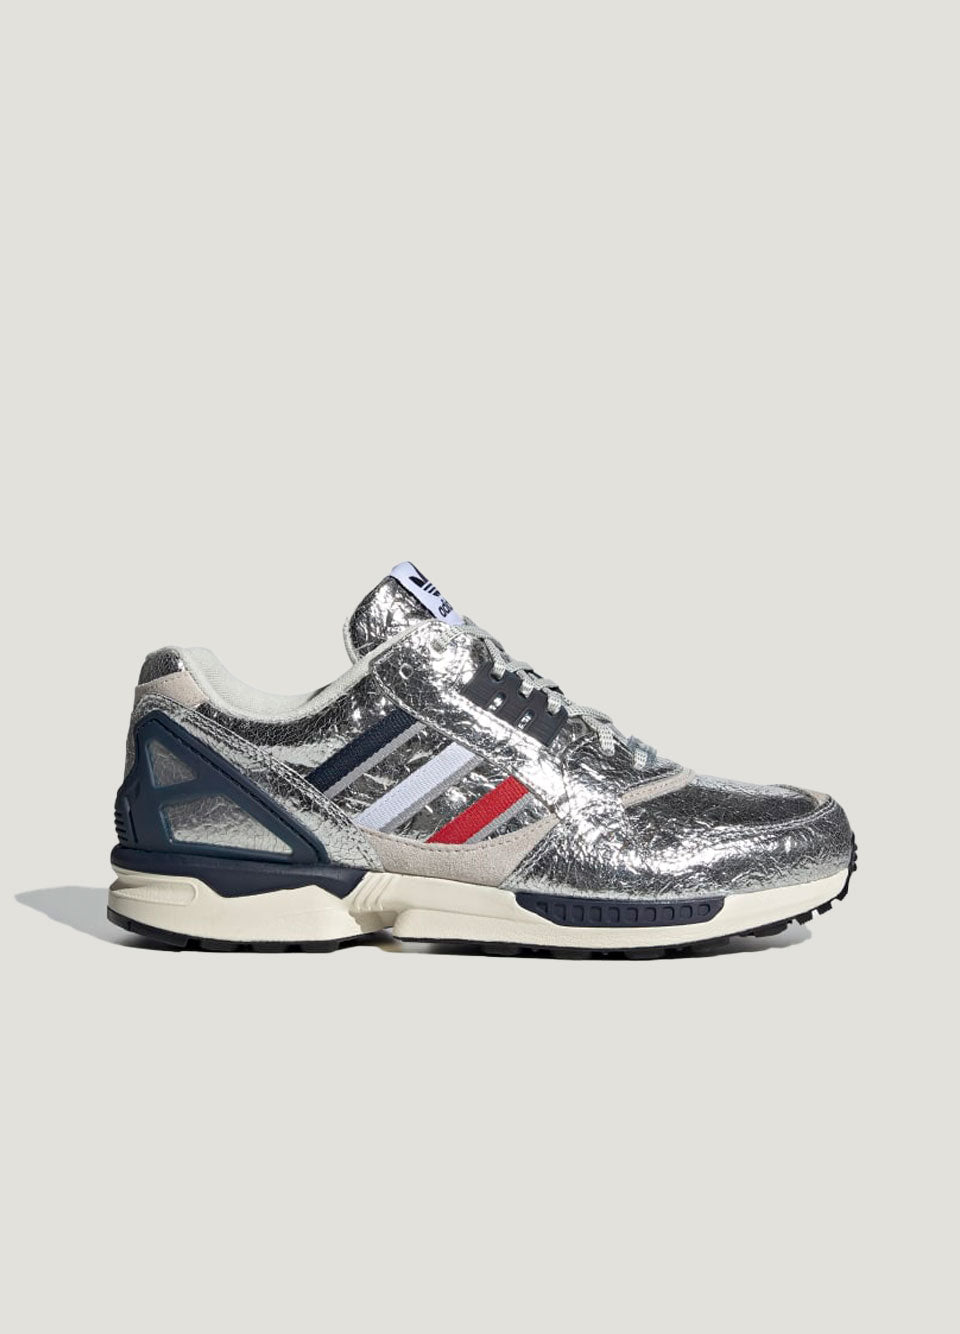 Adidas ZX 9000 --launch-date--2020-08-26